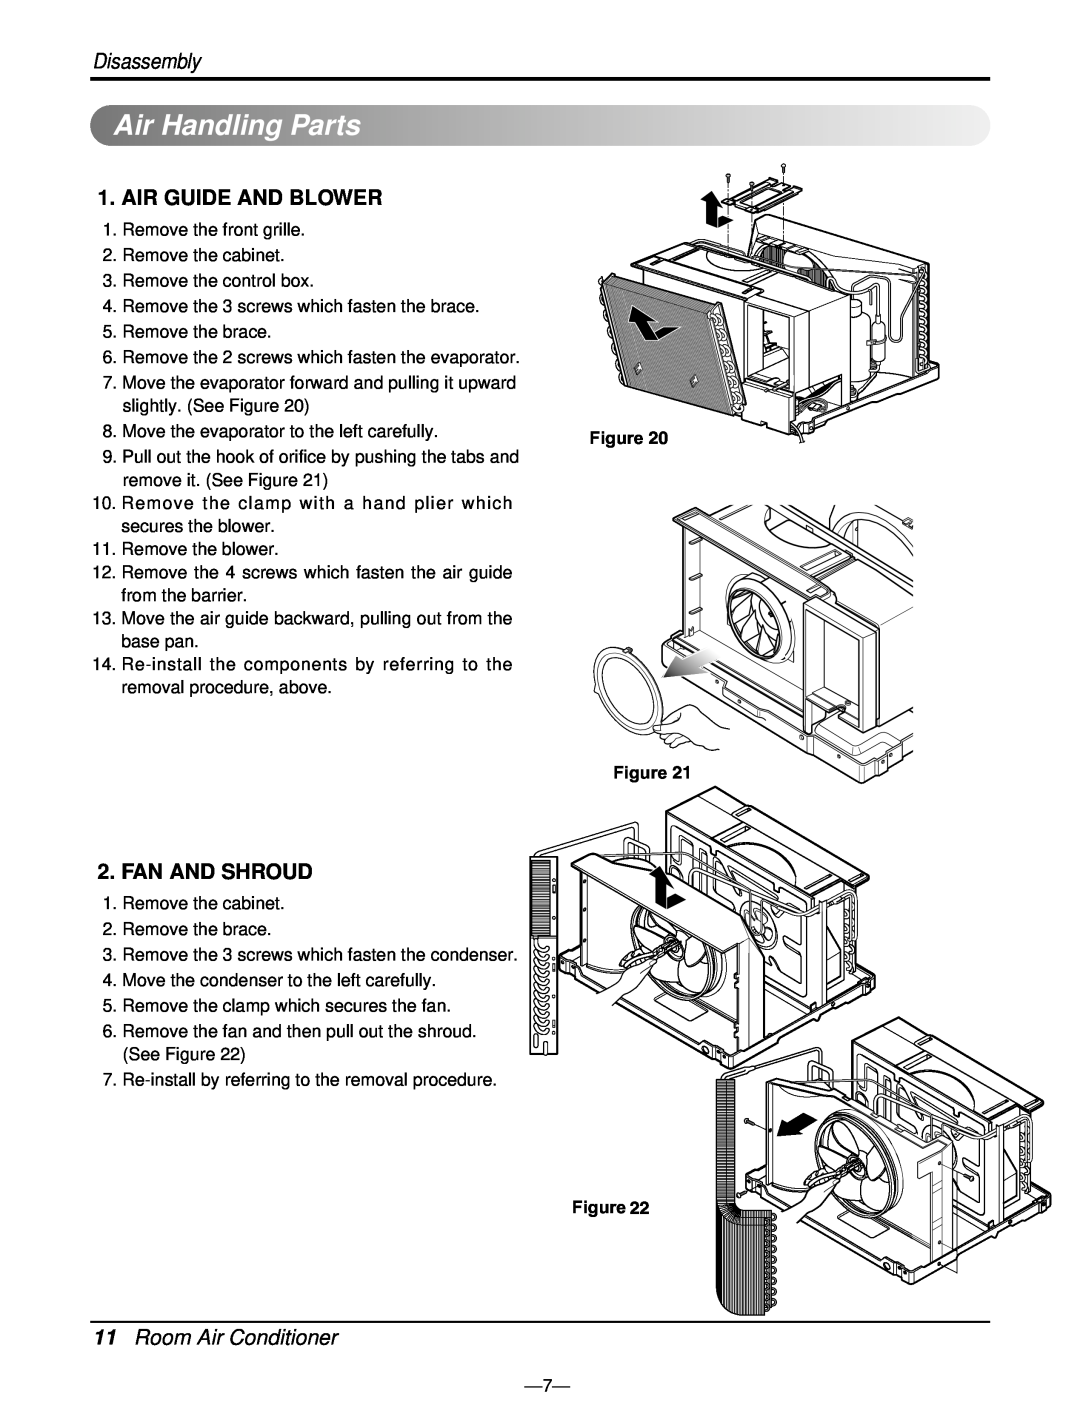 Friedrich CP06E10, CP08E10 manual Air HandlingParts, Air Guide And Blower, Fan And Shroud, Room Air Conditioner, Disassembly 